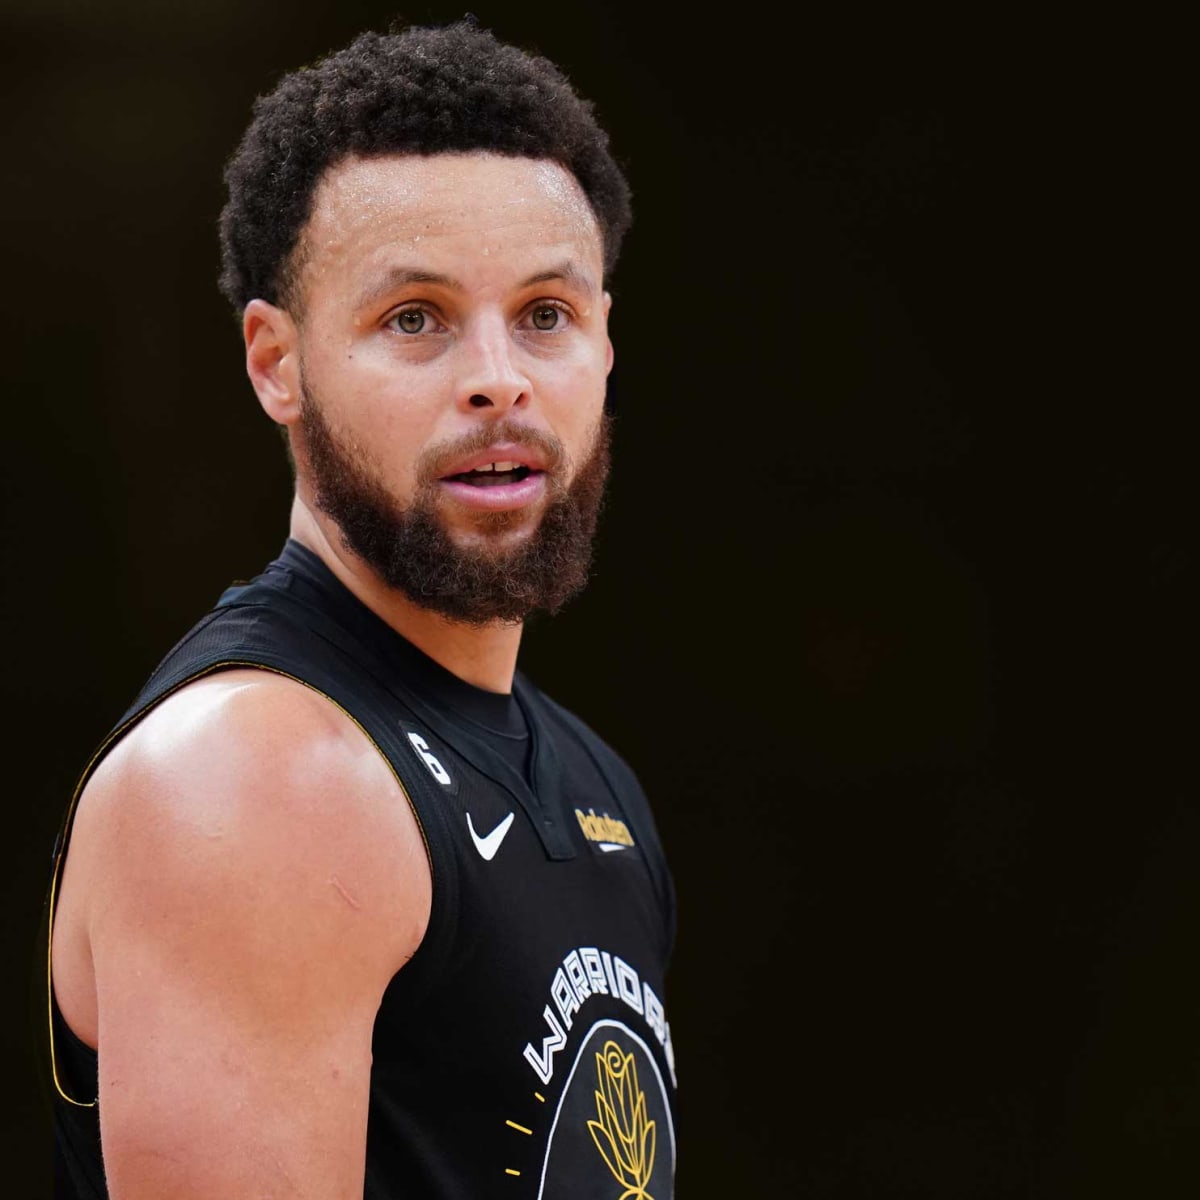 Warriors star Steph Curry named NBA All-Star Game starter